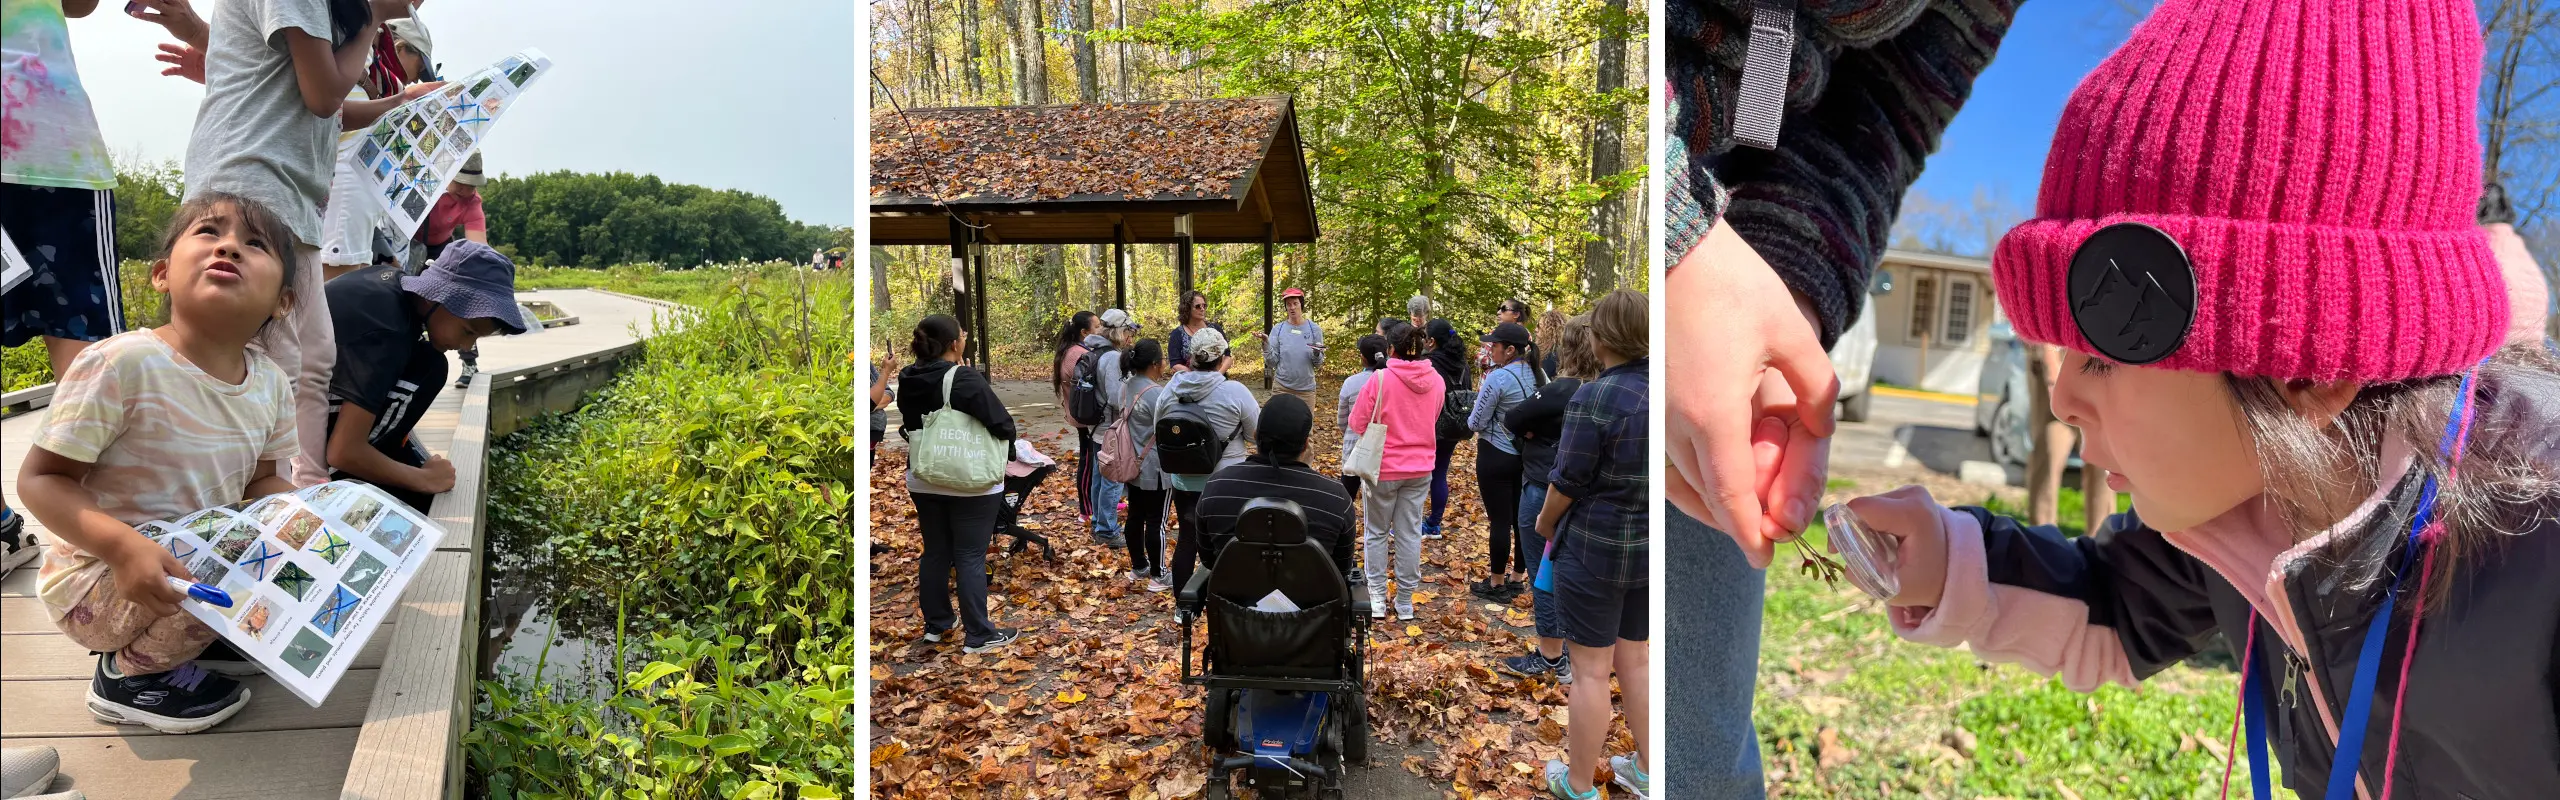 Collage of residents enjoying parks: a little girl exploring a wetlands, a group of adults talking in a circle surrounded by a forest in fall color, and a girl using a microscope to look at maple leaf seed pods.